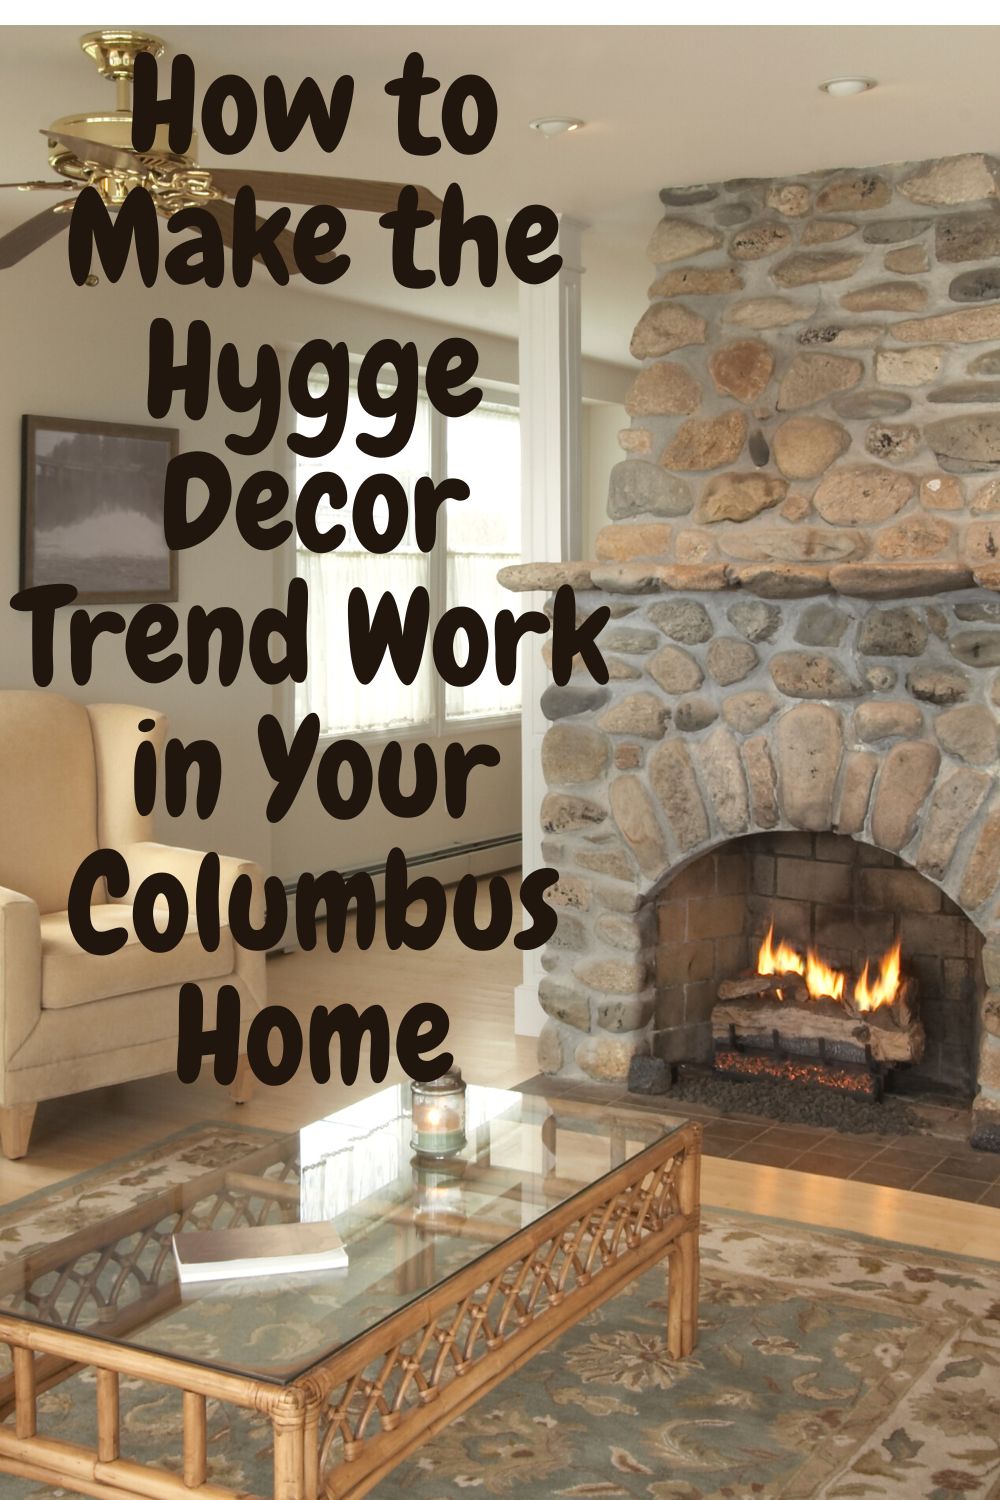 How to Make the Hygge Decor Trend Work in Your Columbus Home